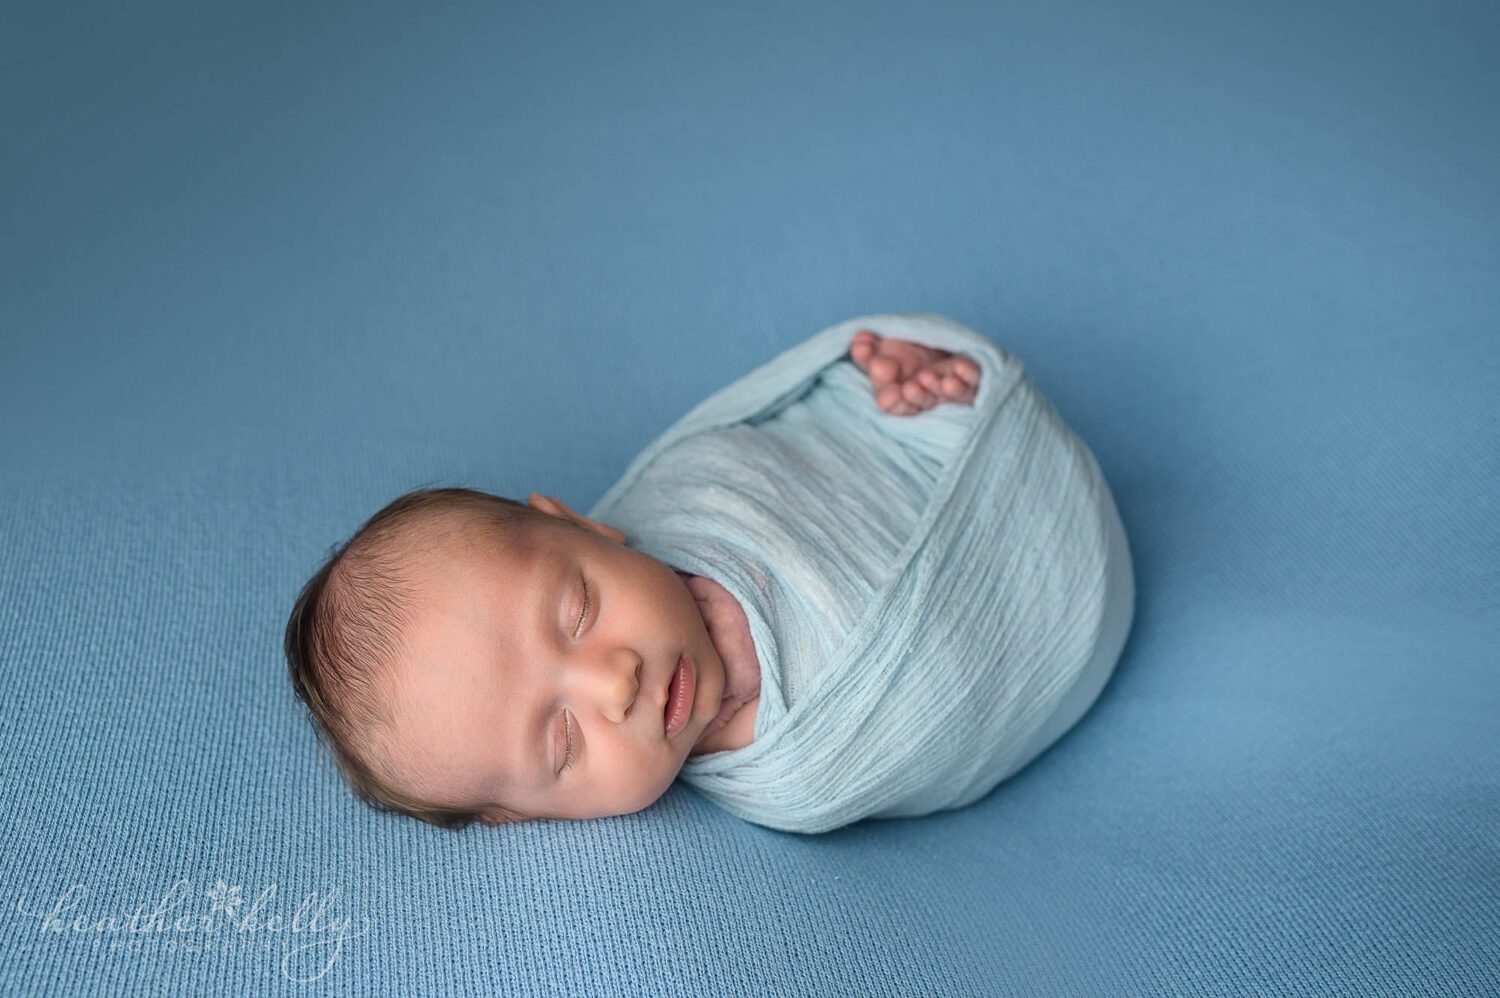 3 week old newborn boy posed for a newborn photography session in danbury ct. He is wrapped in blue with his toes peeking out and is laying on a blue backdrop. danbury ct newborn